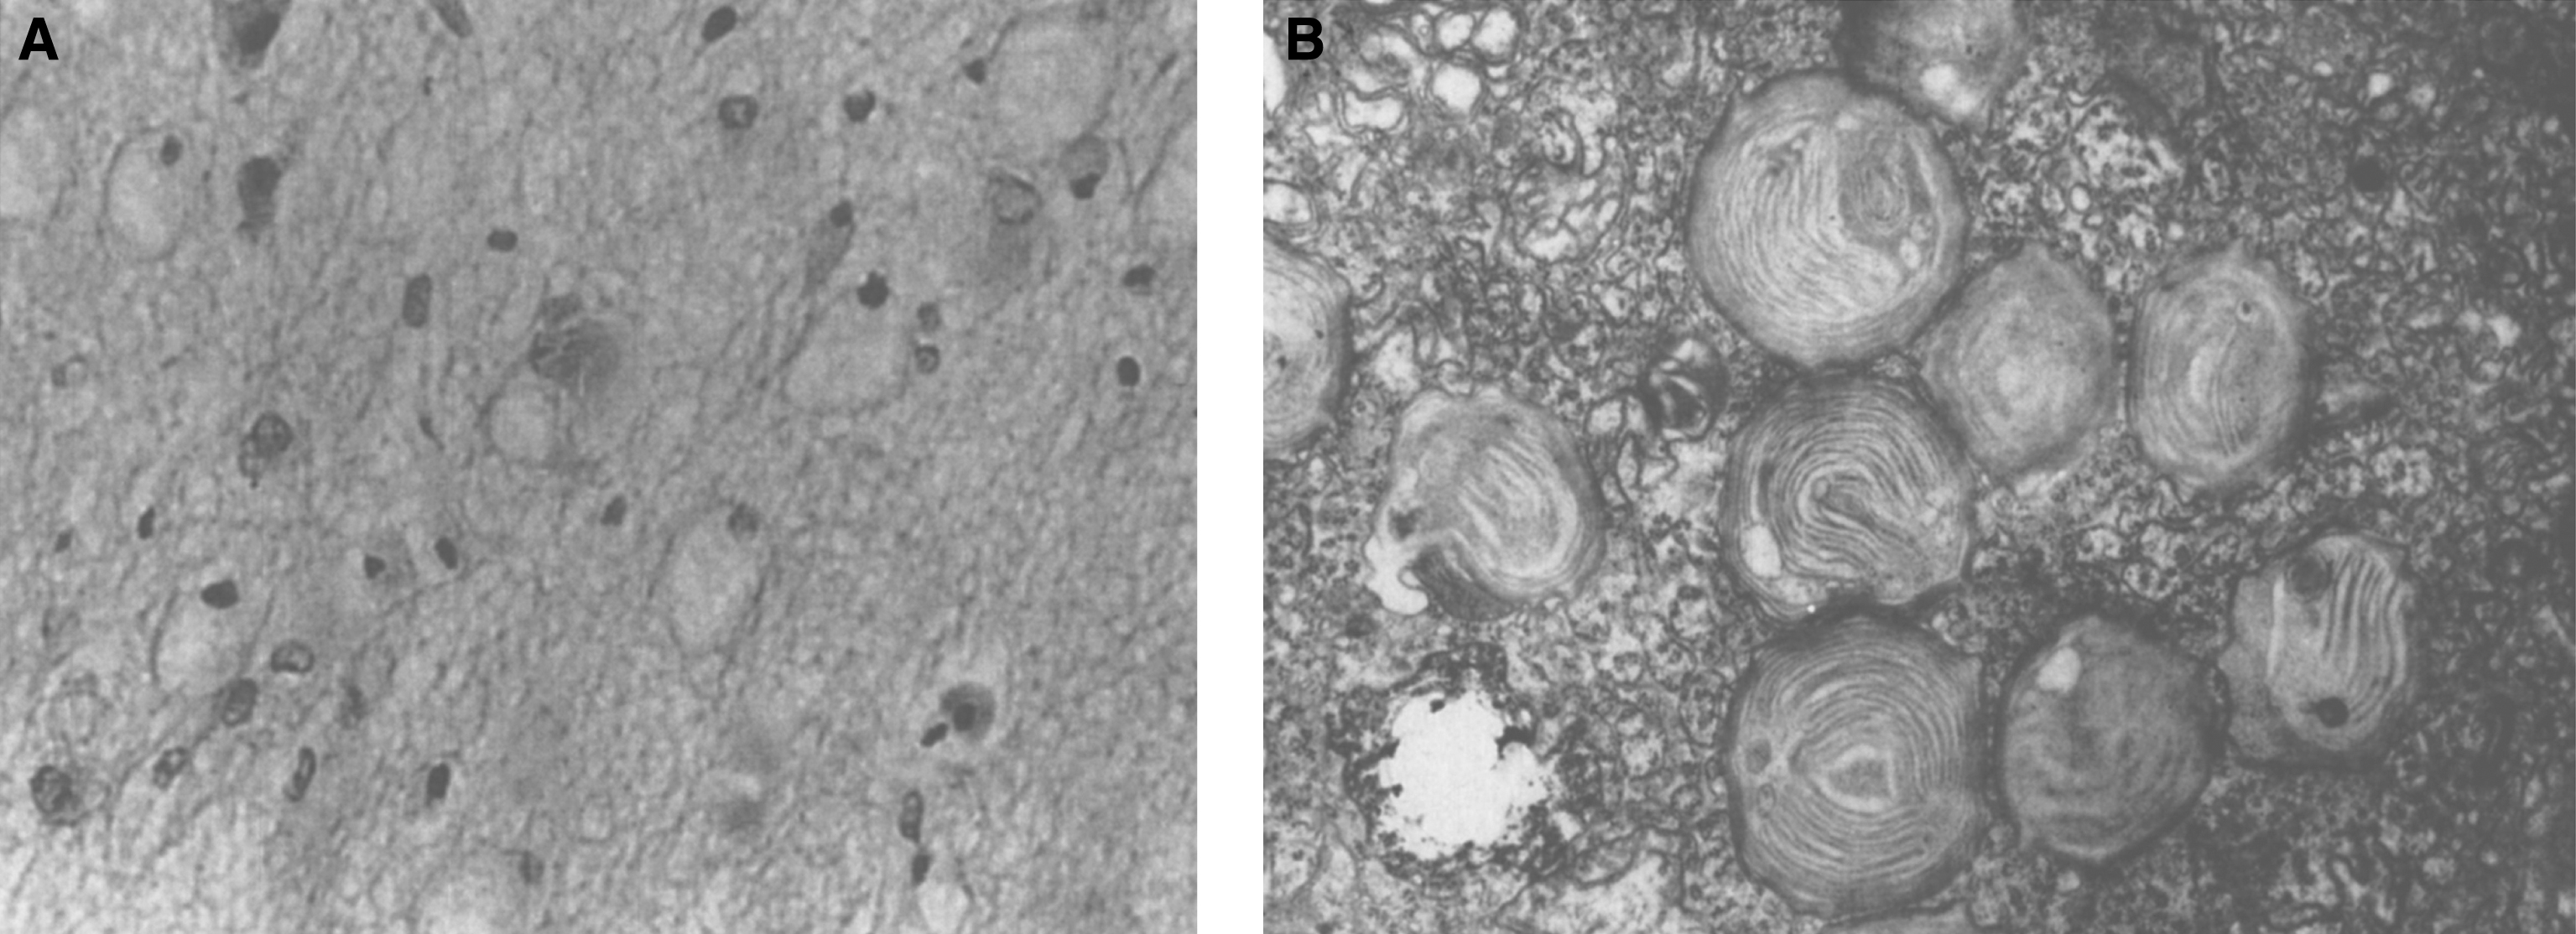 GM2 gangliosidosis type I (Tay-Sachs disease). (A) Microscopic section of the brain shows large swollen neurons due to accumulation of ganglioside. (B) Electron micrograph showing characteristic membranous concentric bodies.